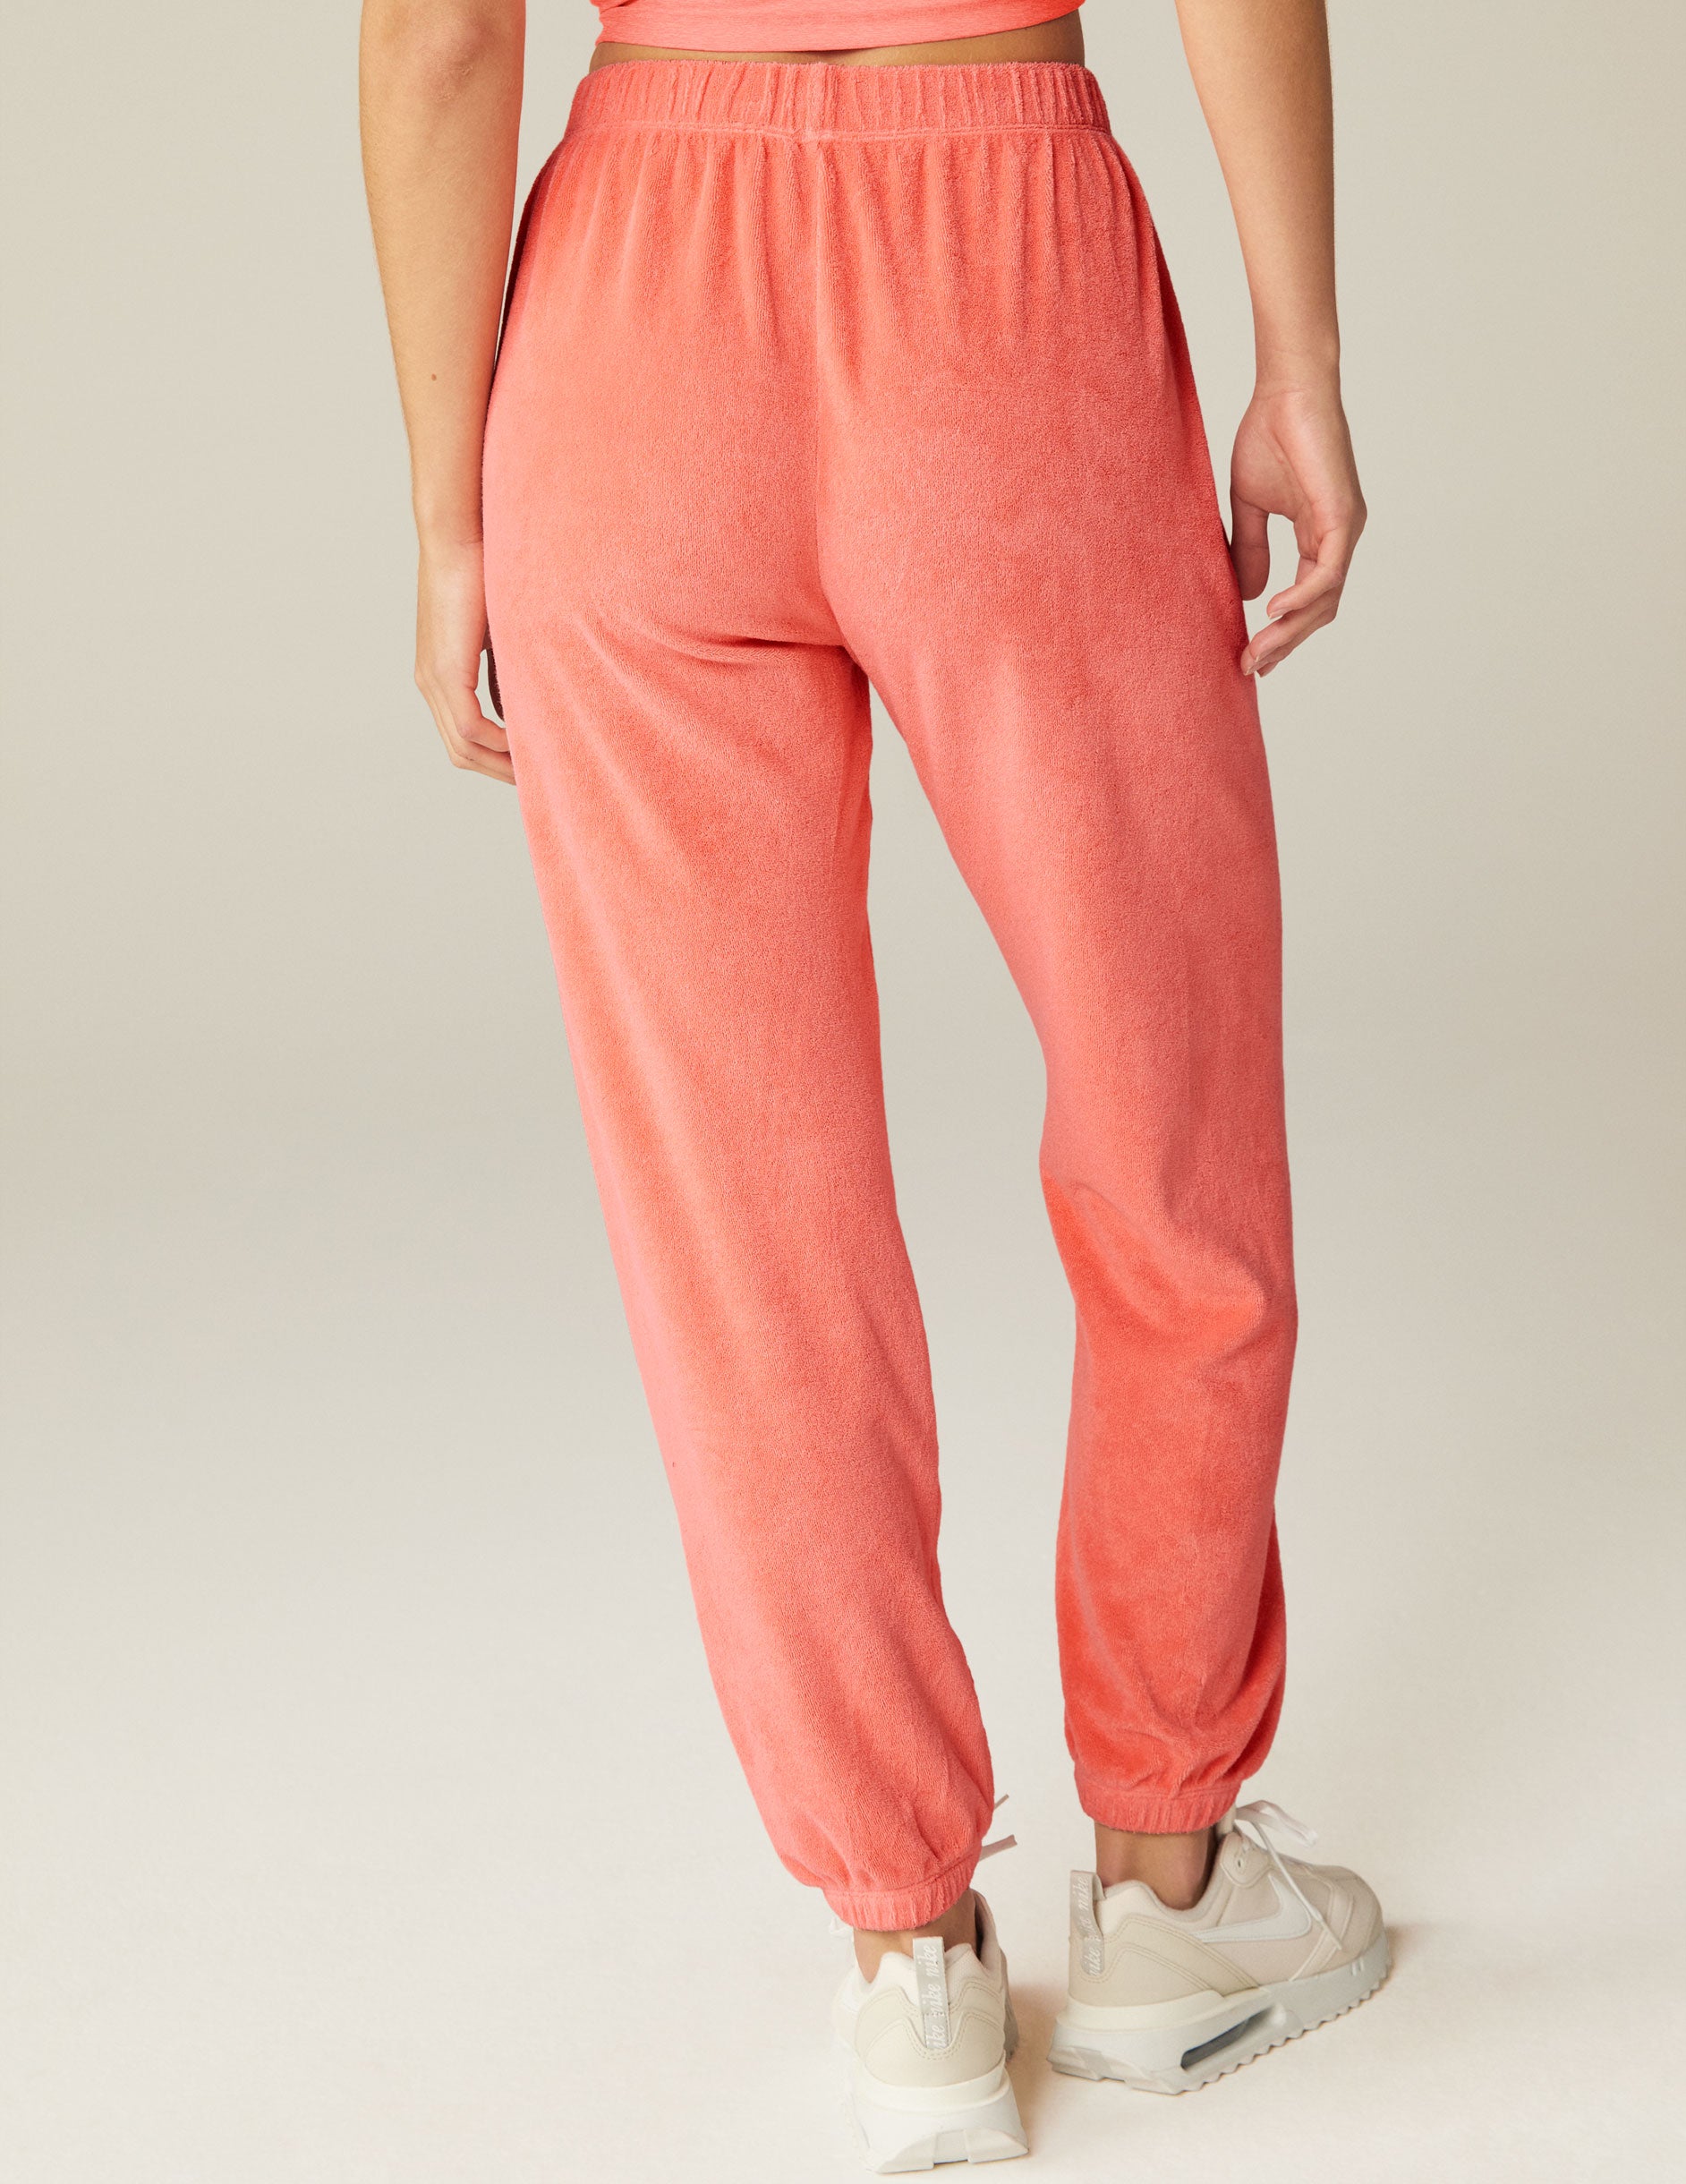 Beyond Yoga X DONNI. Terry Henley Sweatpant